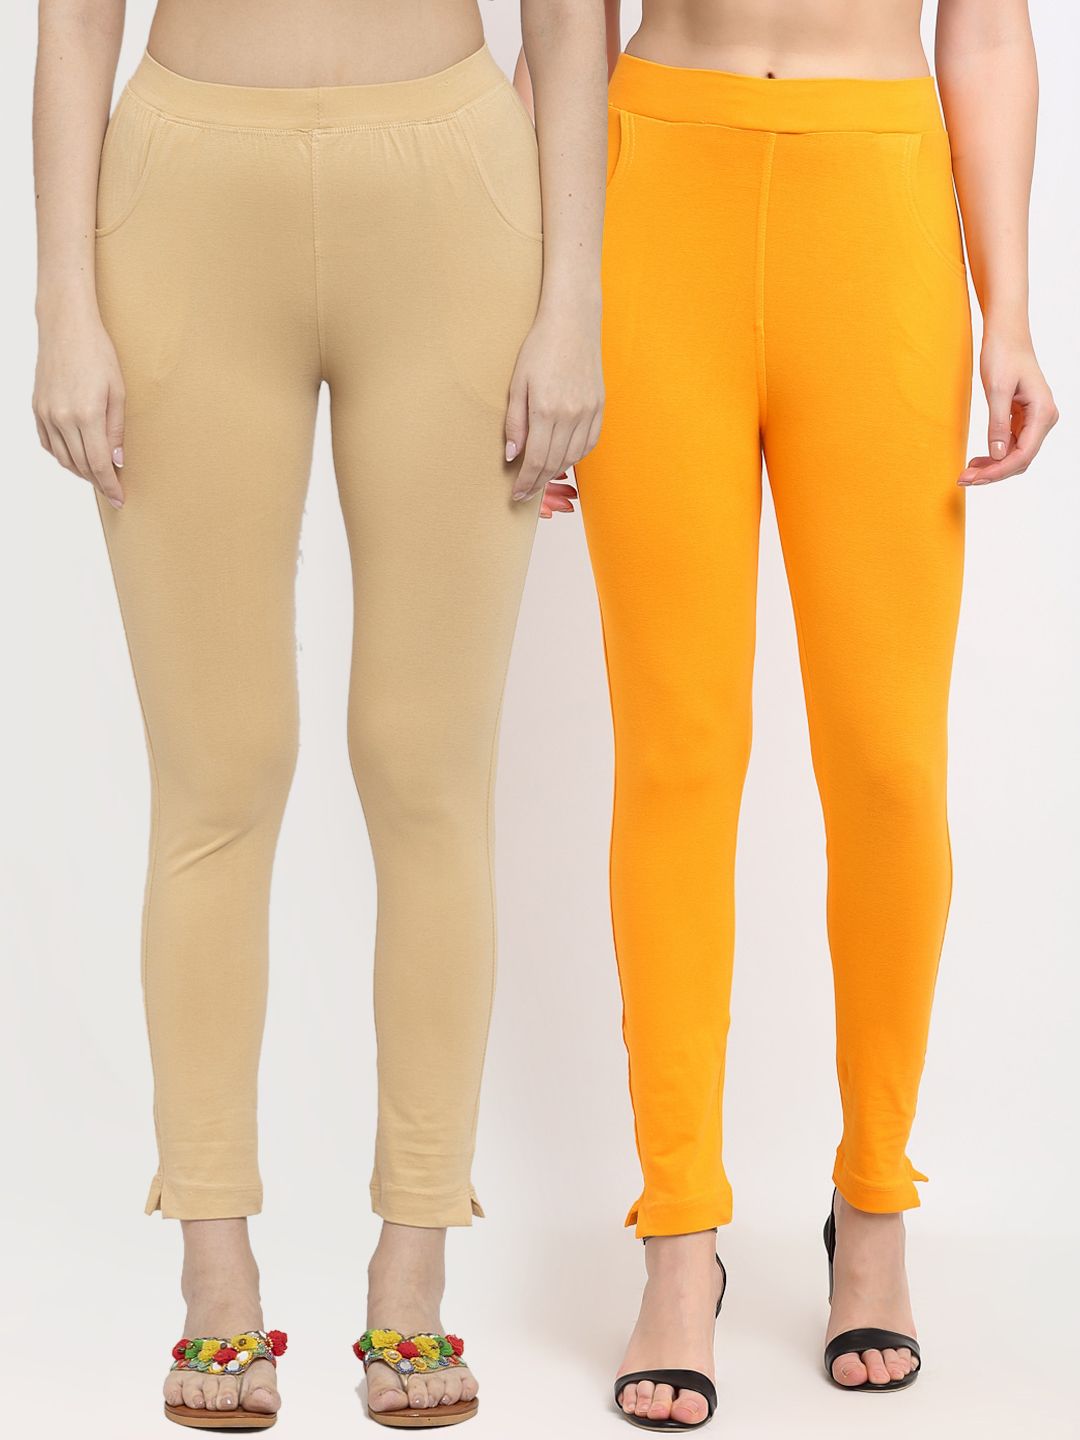 TAG 7 Women Yellow & Beige Pack of 2 Leggings Price in India